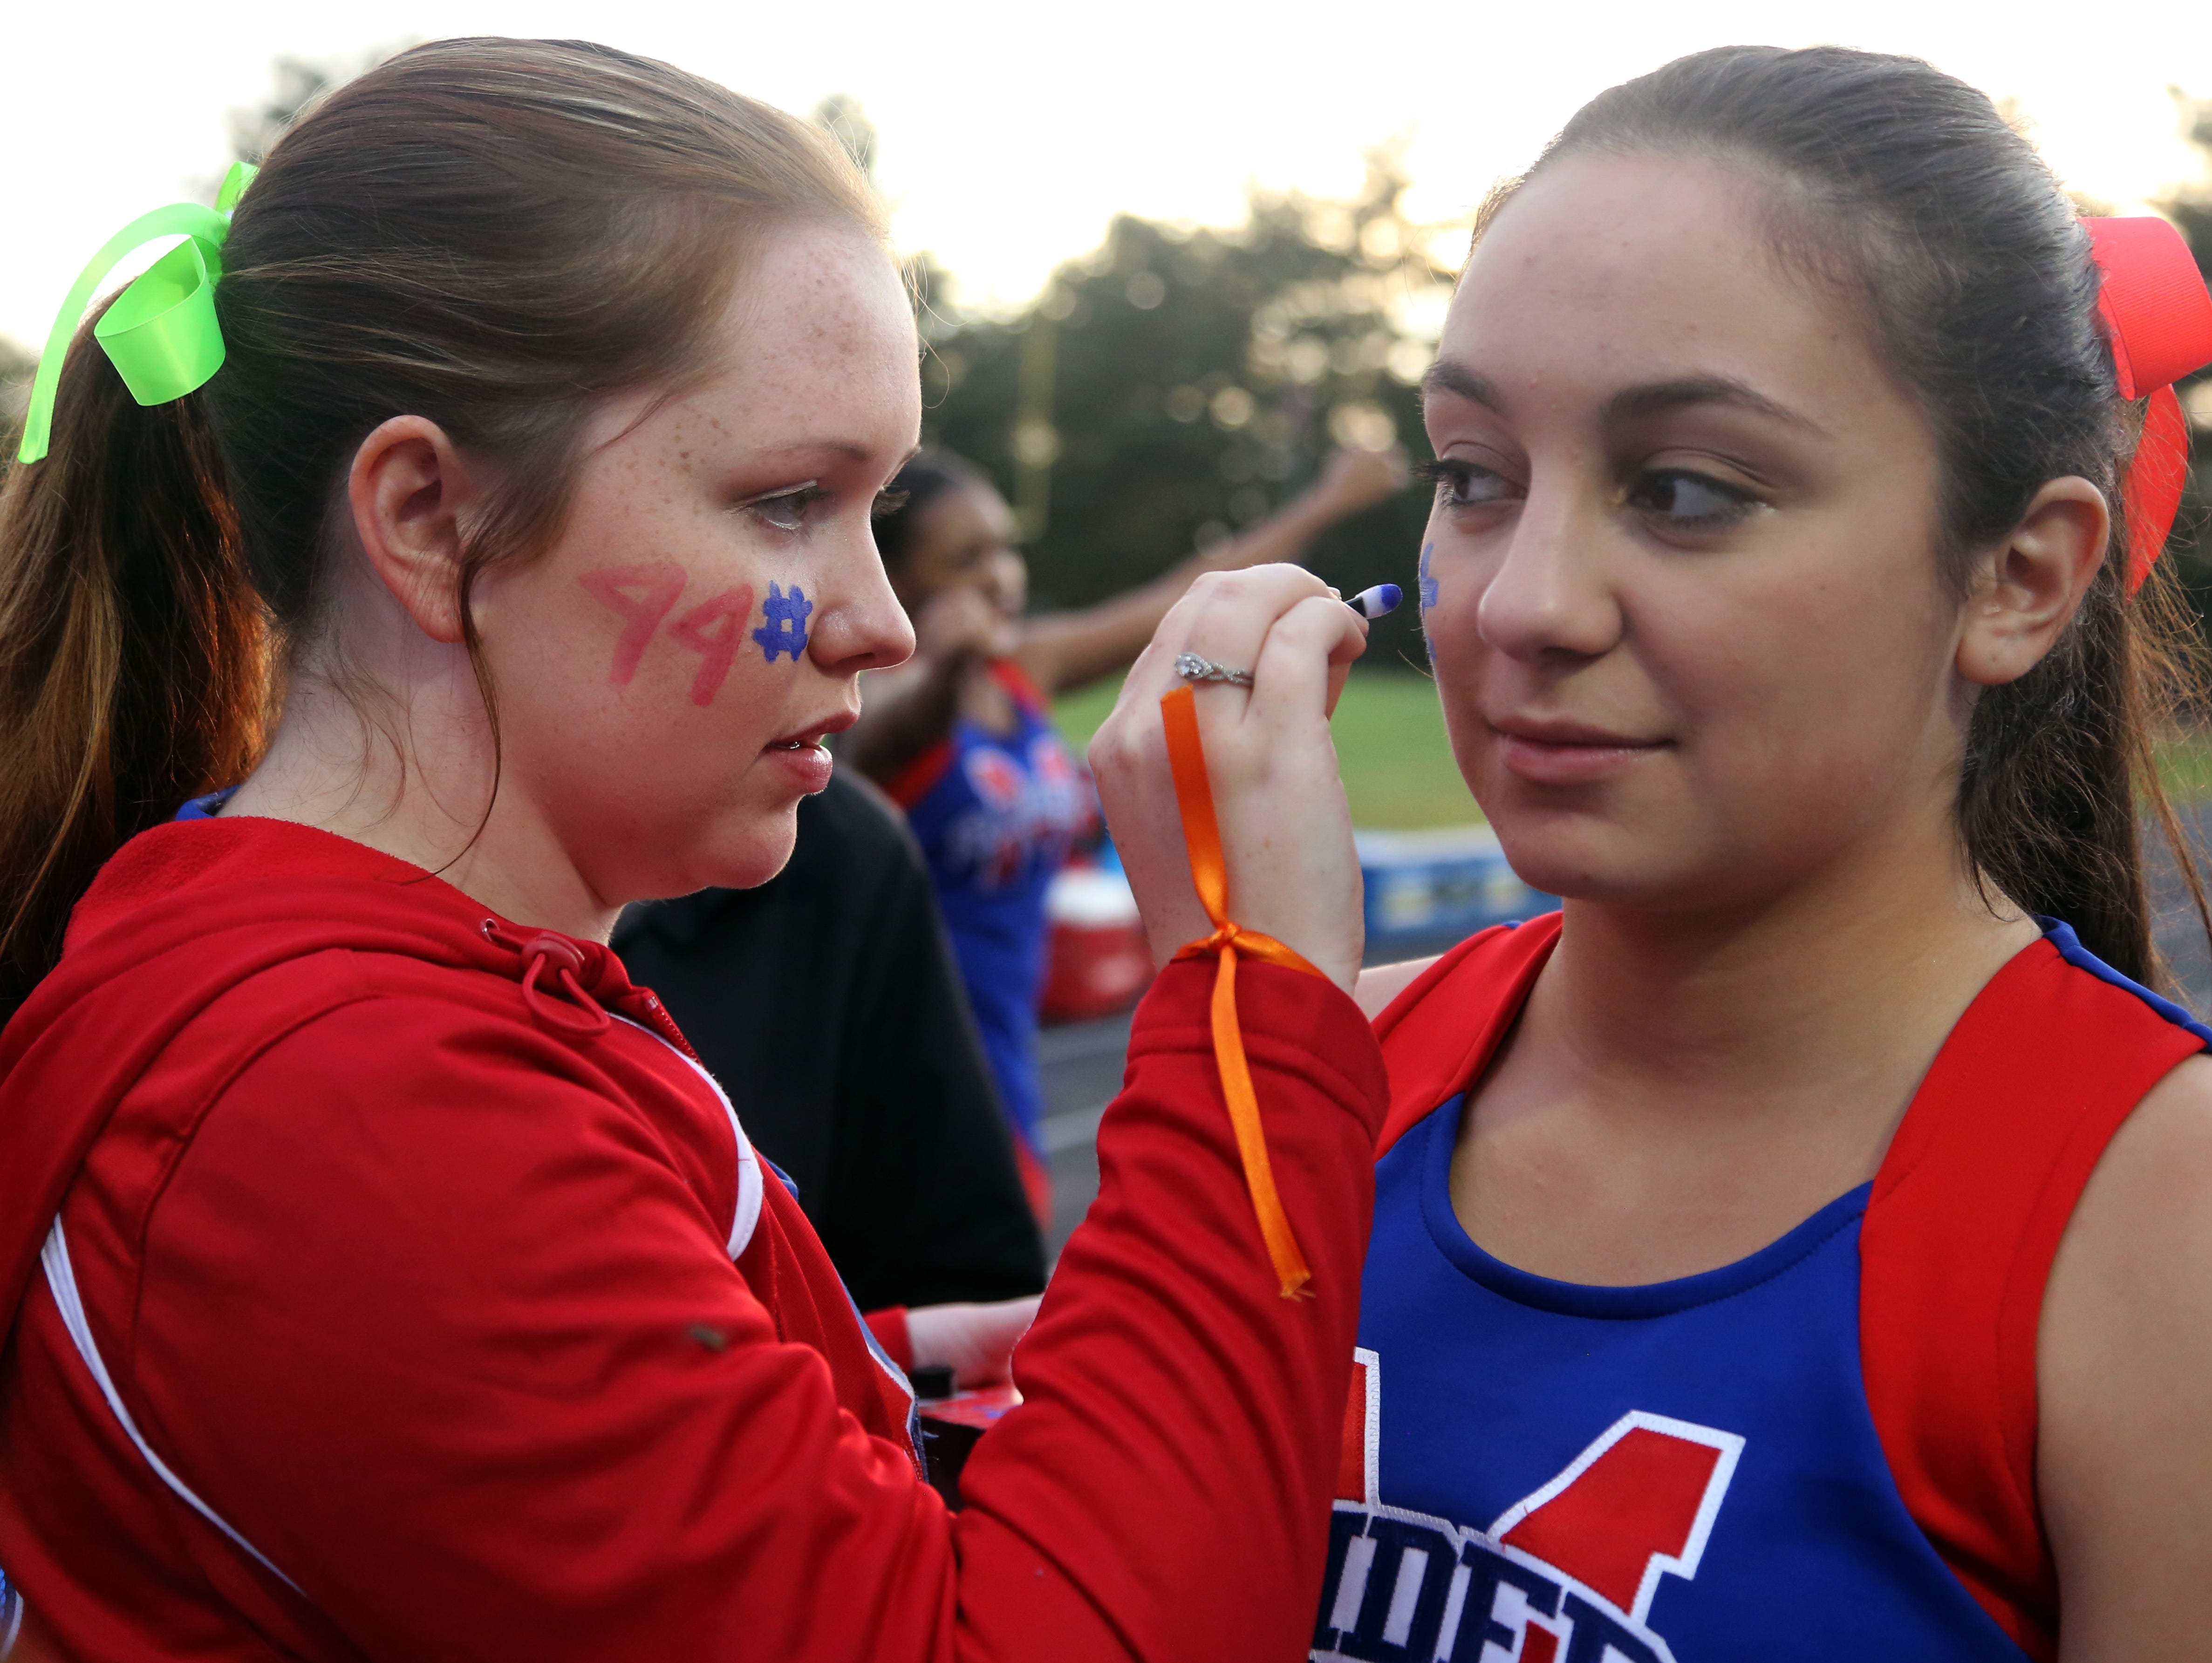 McGavock cheerleader Alaina Solis, left, paints #44 on fellow cheerleader Lauren Estrada's cheek in honor of football player Hunter Jackson, who wore No. 44, prior to the start of their home game against Cane Ridge in September.